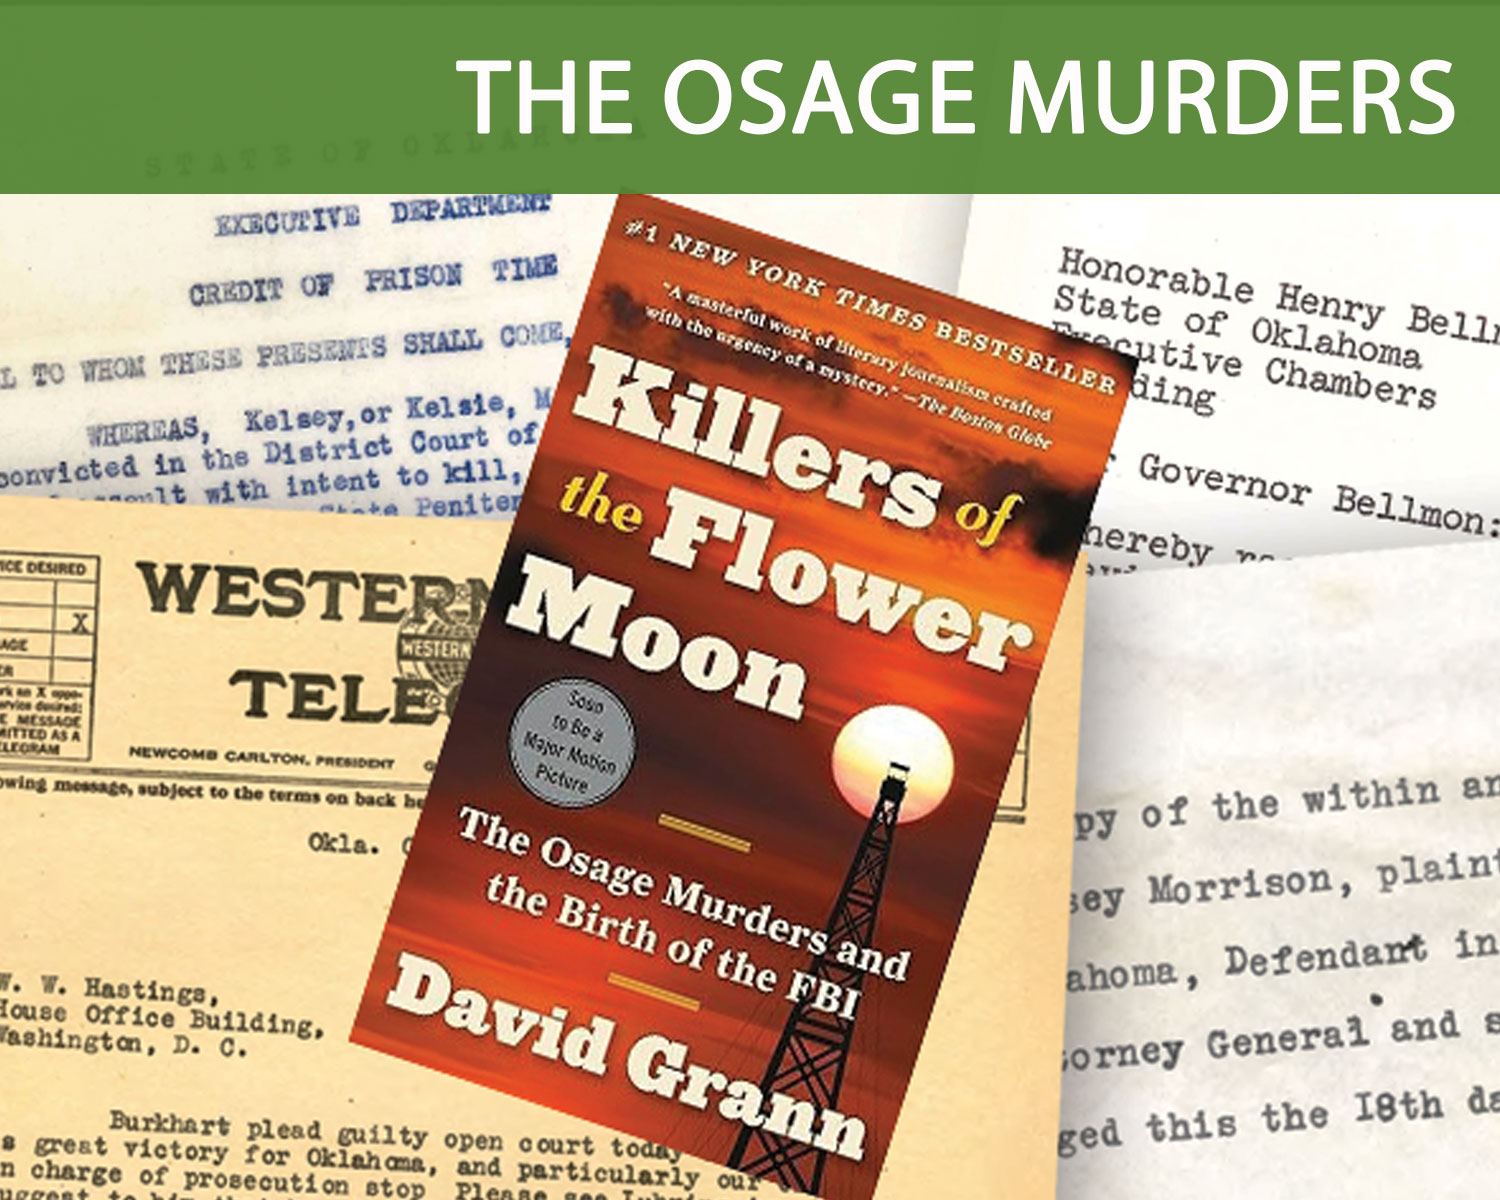 Reign of Terror: the Osage Murder document, correspondence and court files